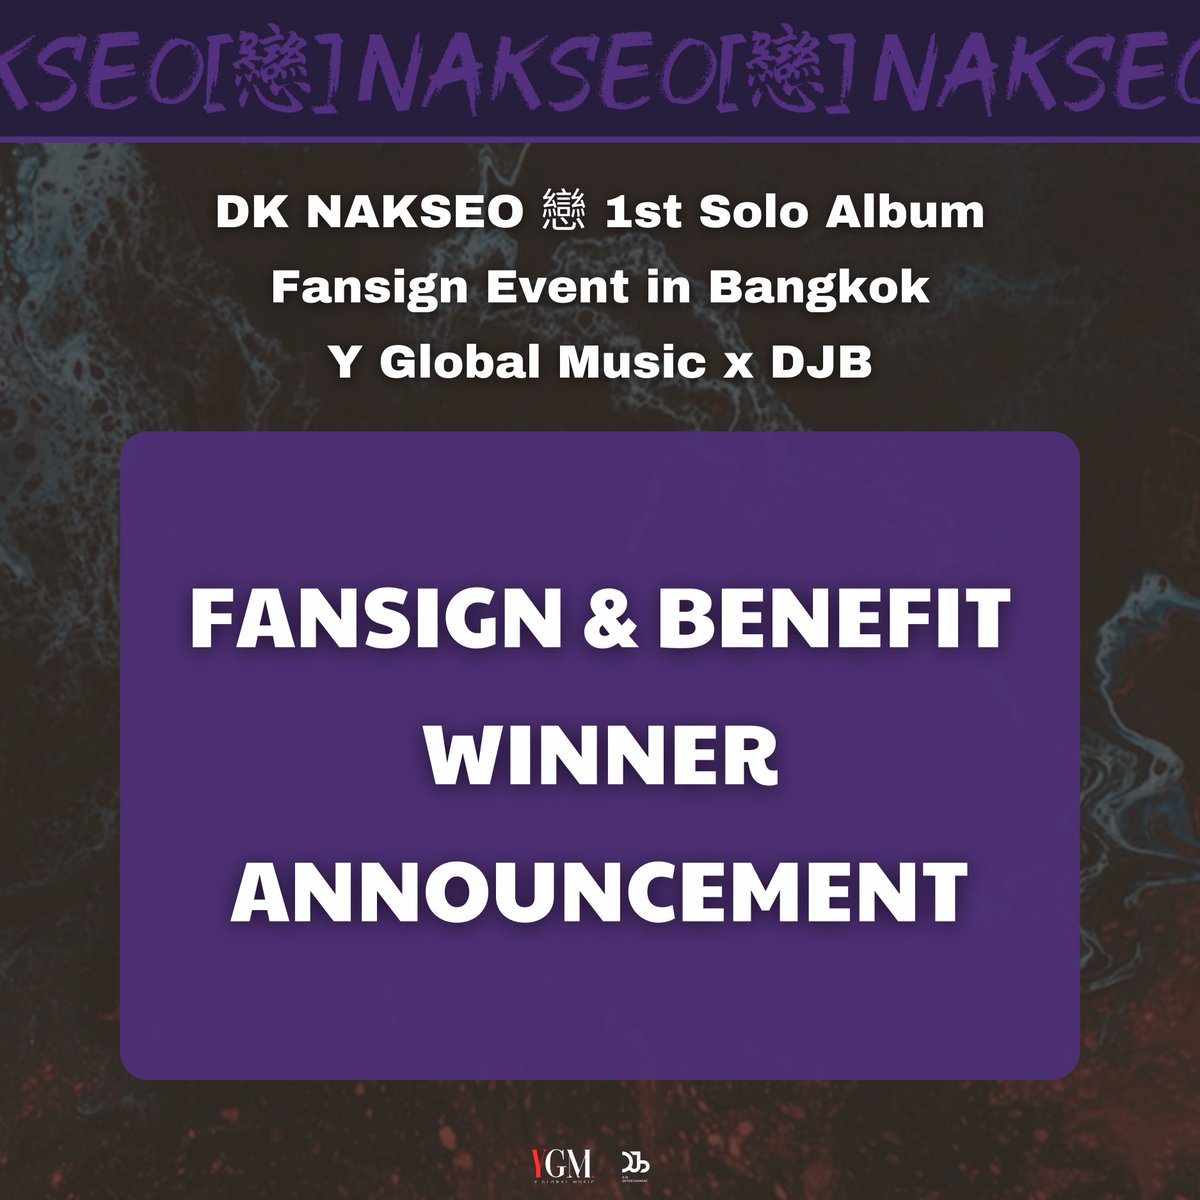 🎉[FANSIGN & BENEFITS Winner Announcement] DK NAKSEO[戀] 1st Solo Album Fansign Event in Bangkok x Y Global Music 🔗 facebook.com/share/p/heMdpr… Date and Location✨️ 🗓 วันที่ : 21 April 2024 (11:30AM) 📍 สถานที่ : DONKI MALL THONGLOR #DK_NAKSEO_FansigninBKK